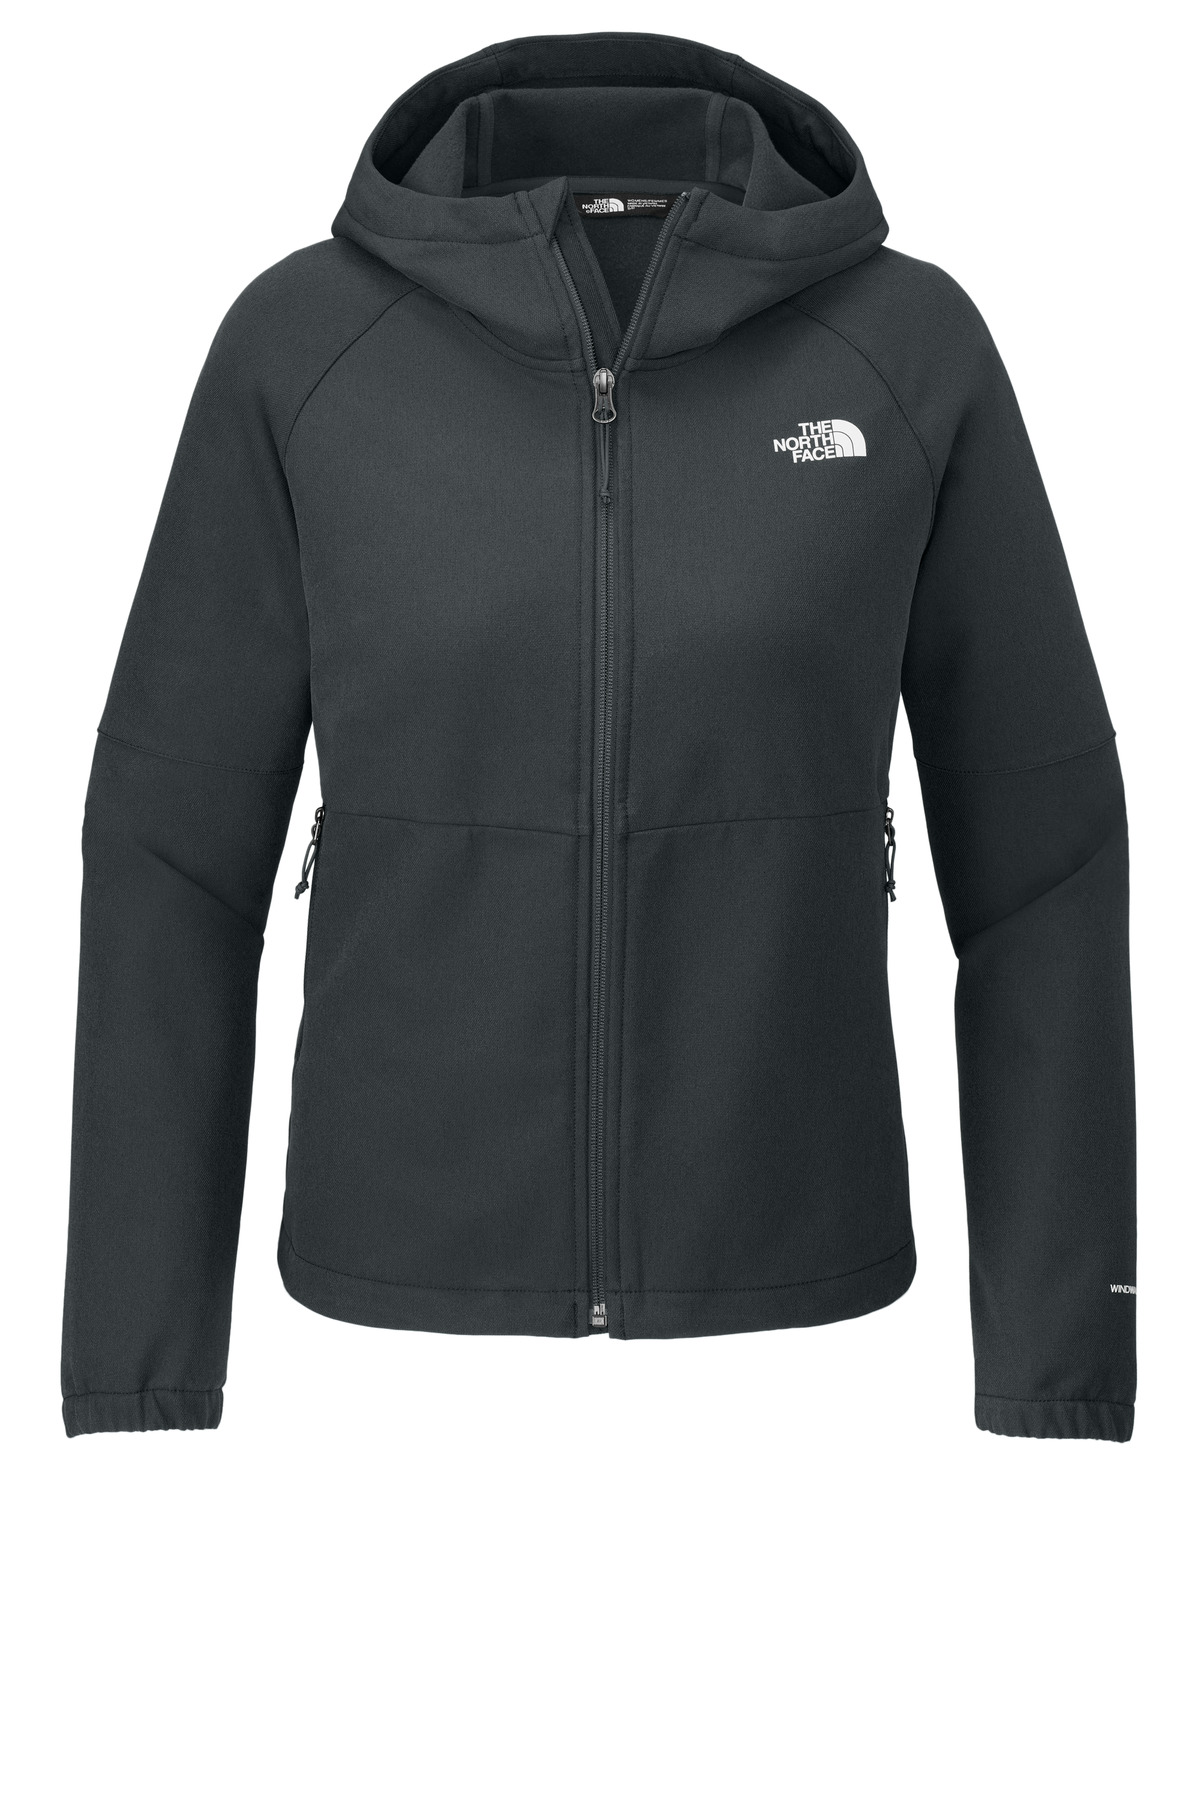 The North Face Ladies Barr Lake Hooded Soft Shell Jacket-The North Face